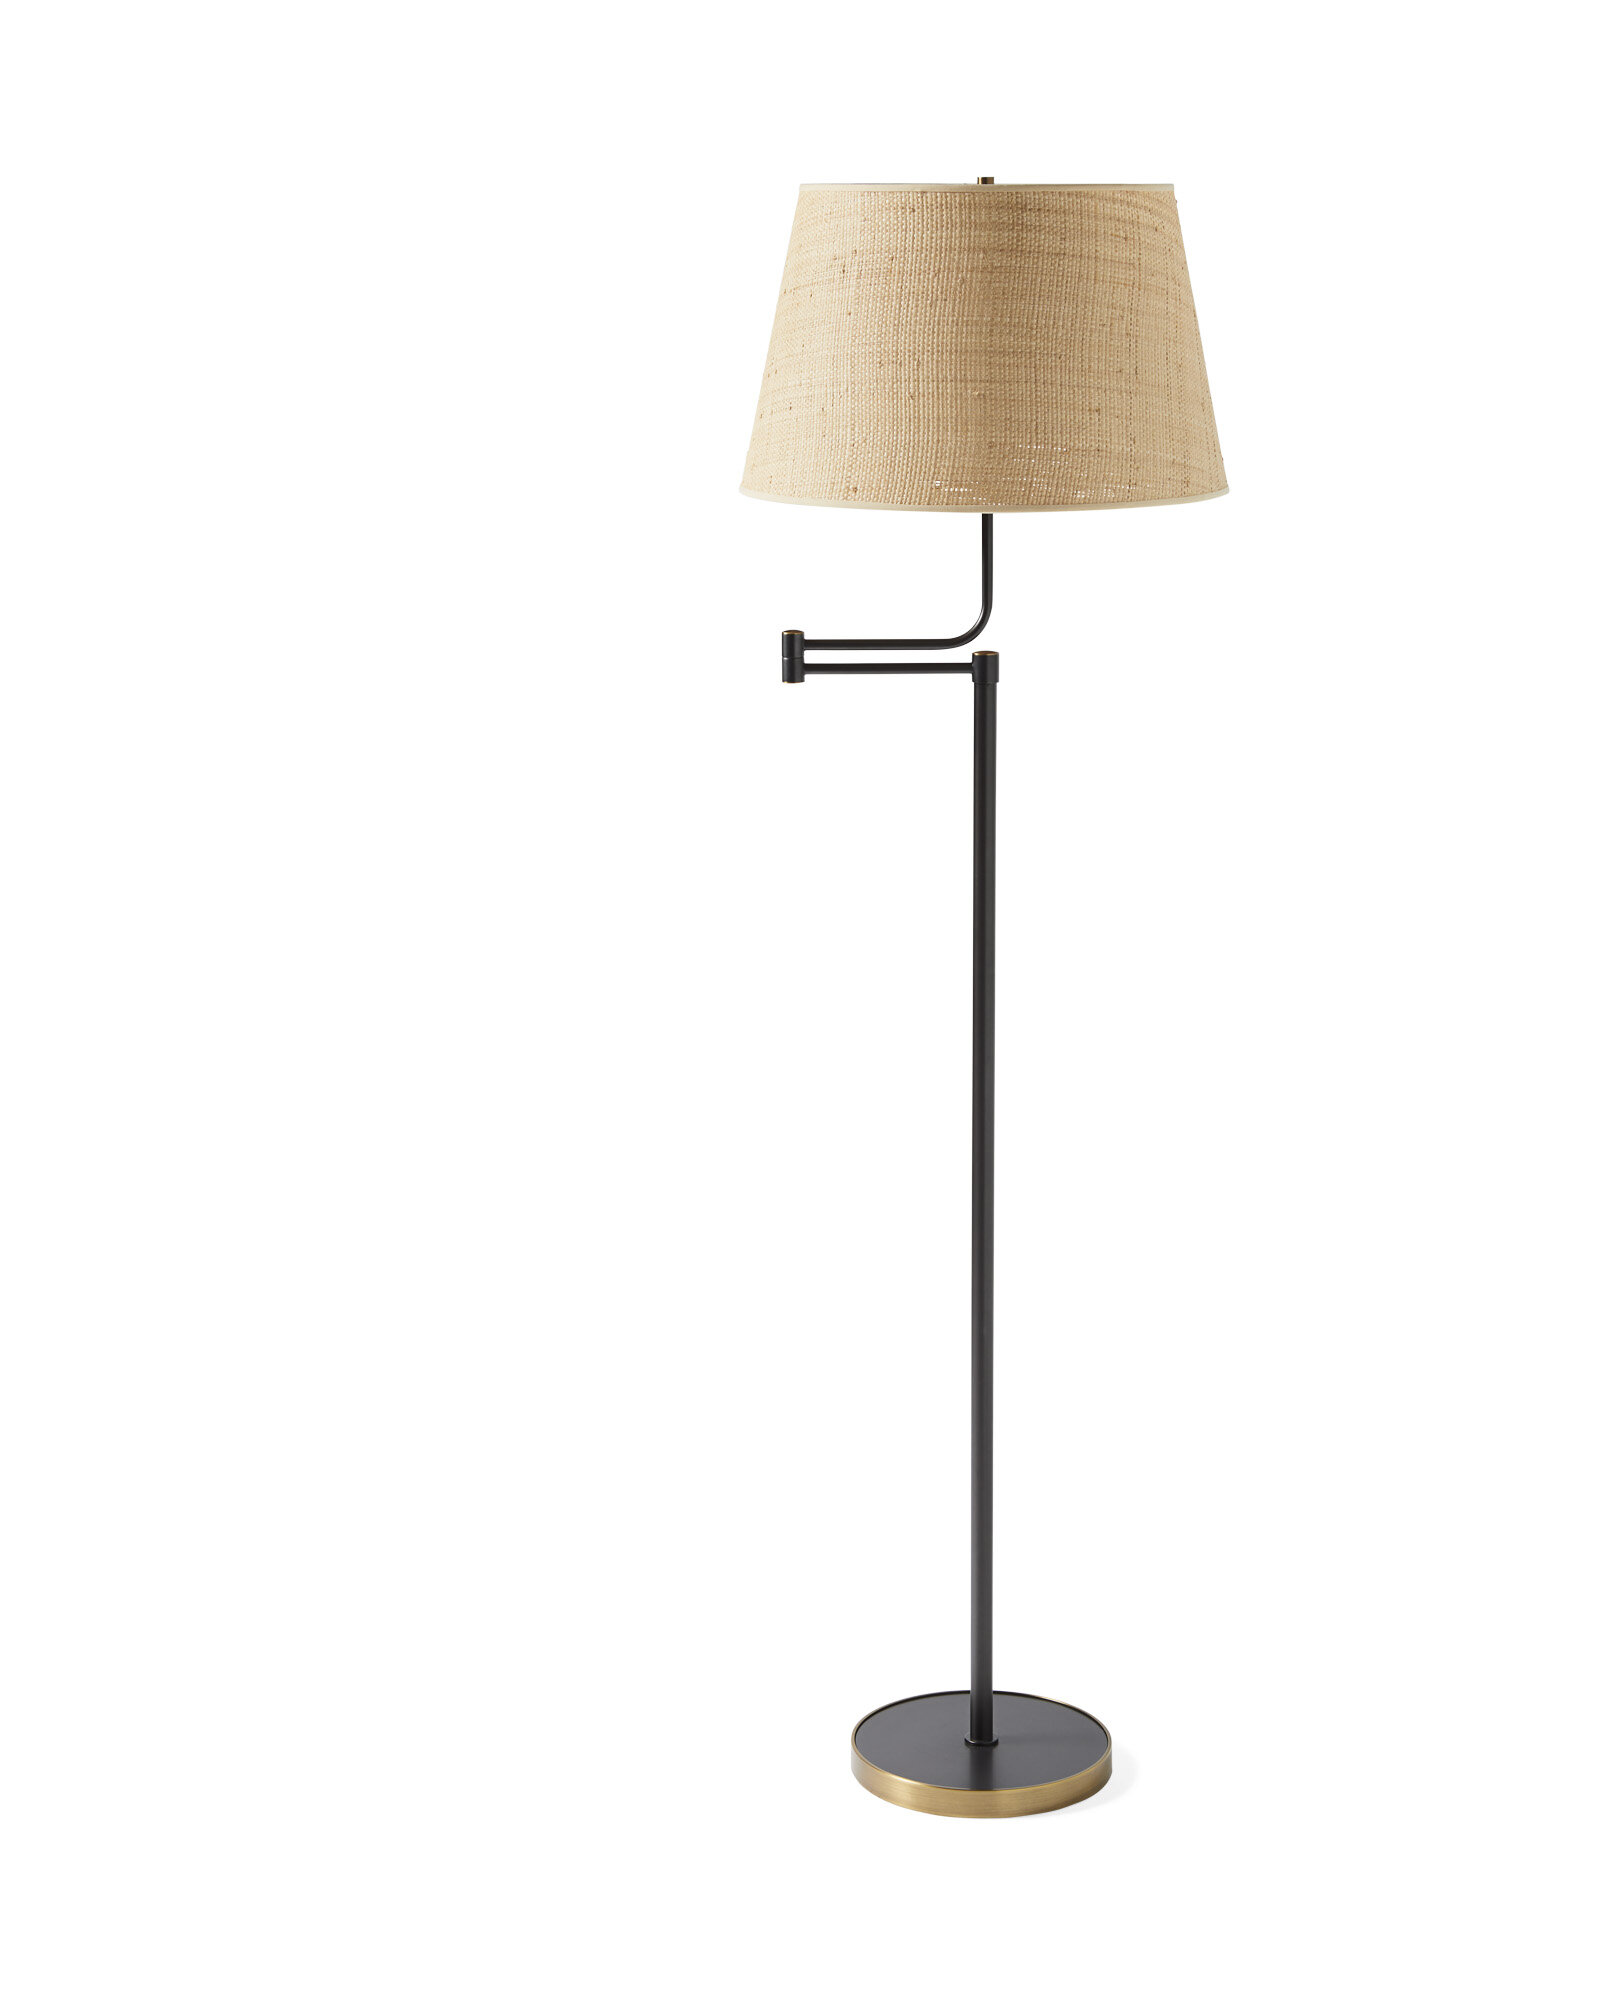 Montpellier Floor Lamp - Serena and Lily.jpeg